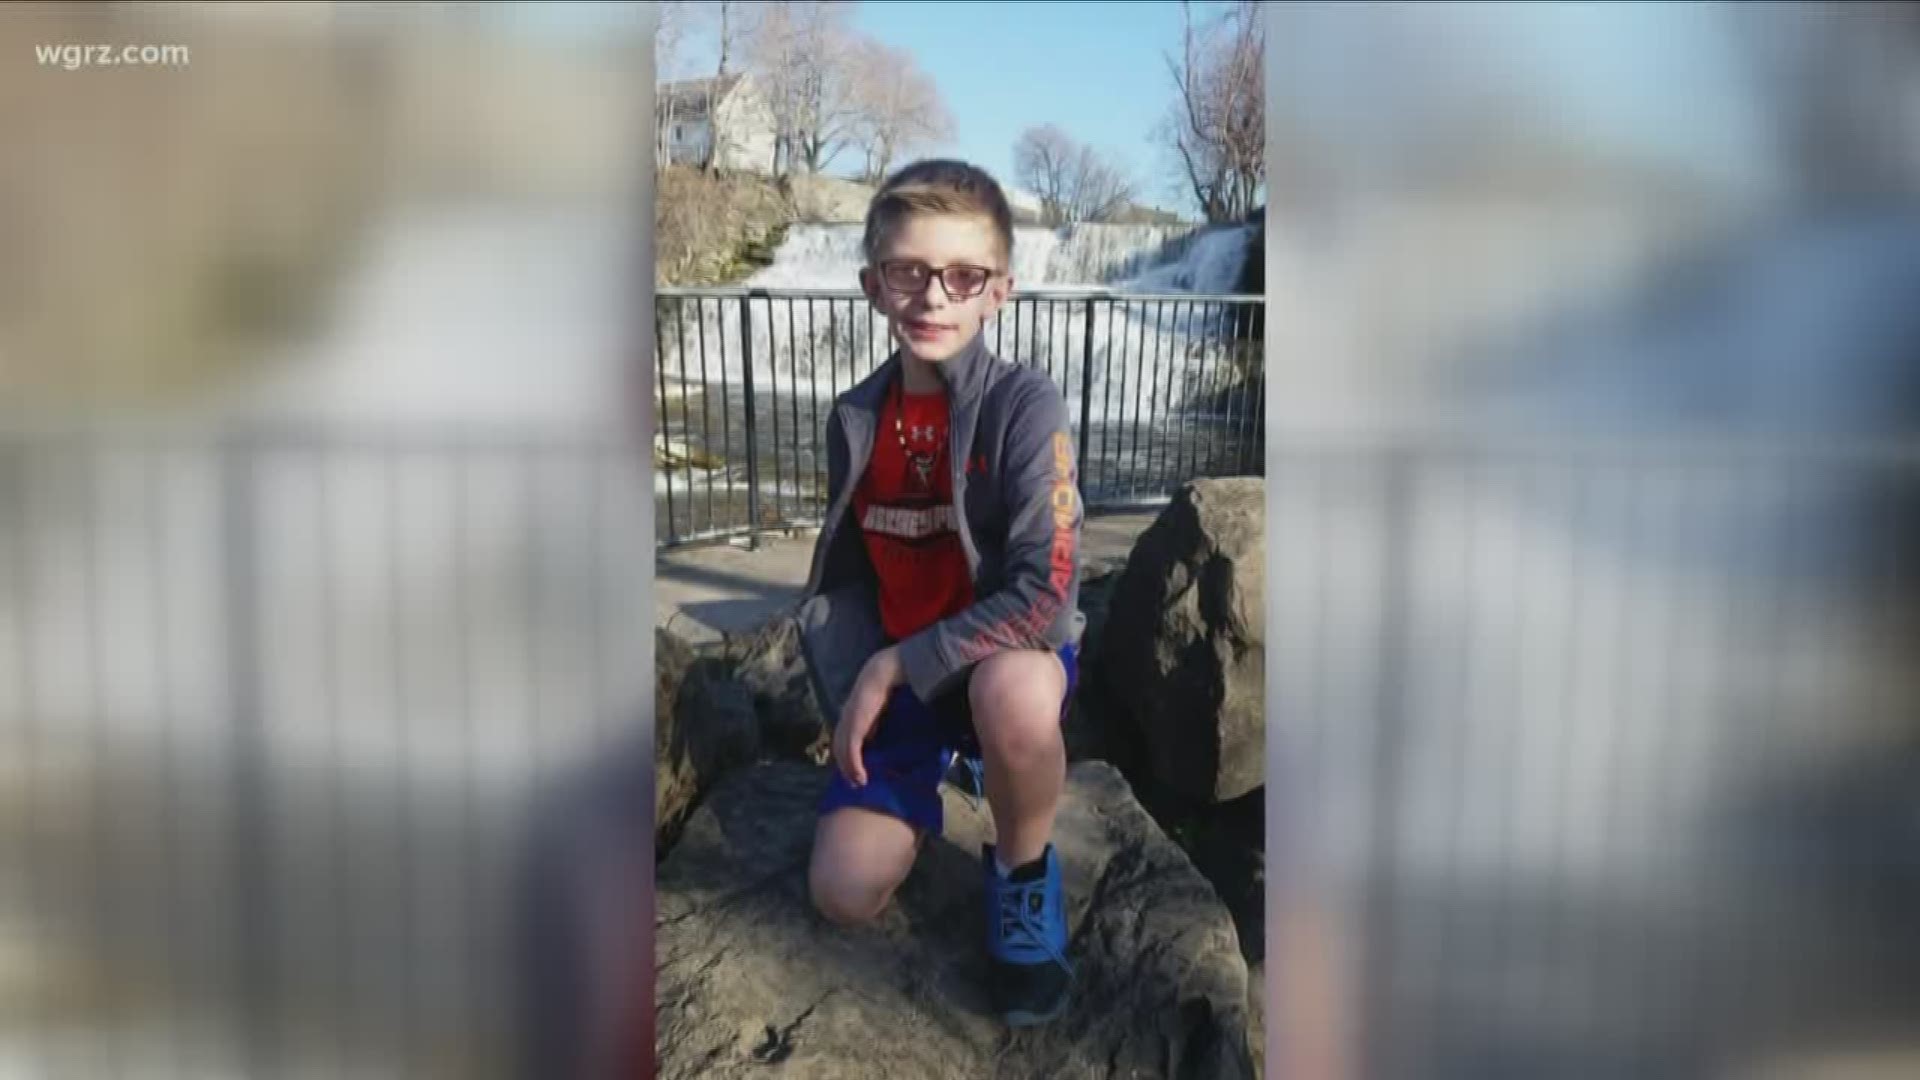 Child on bicycle without helmet injured after being hit by car | wgrz.com